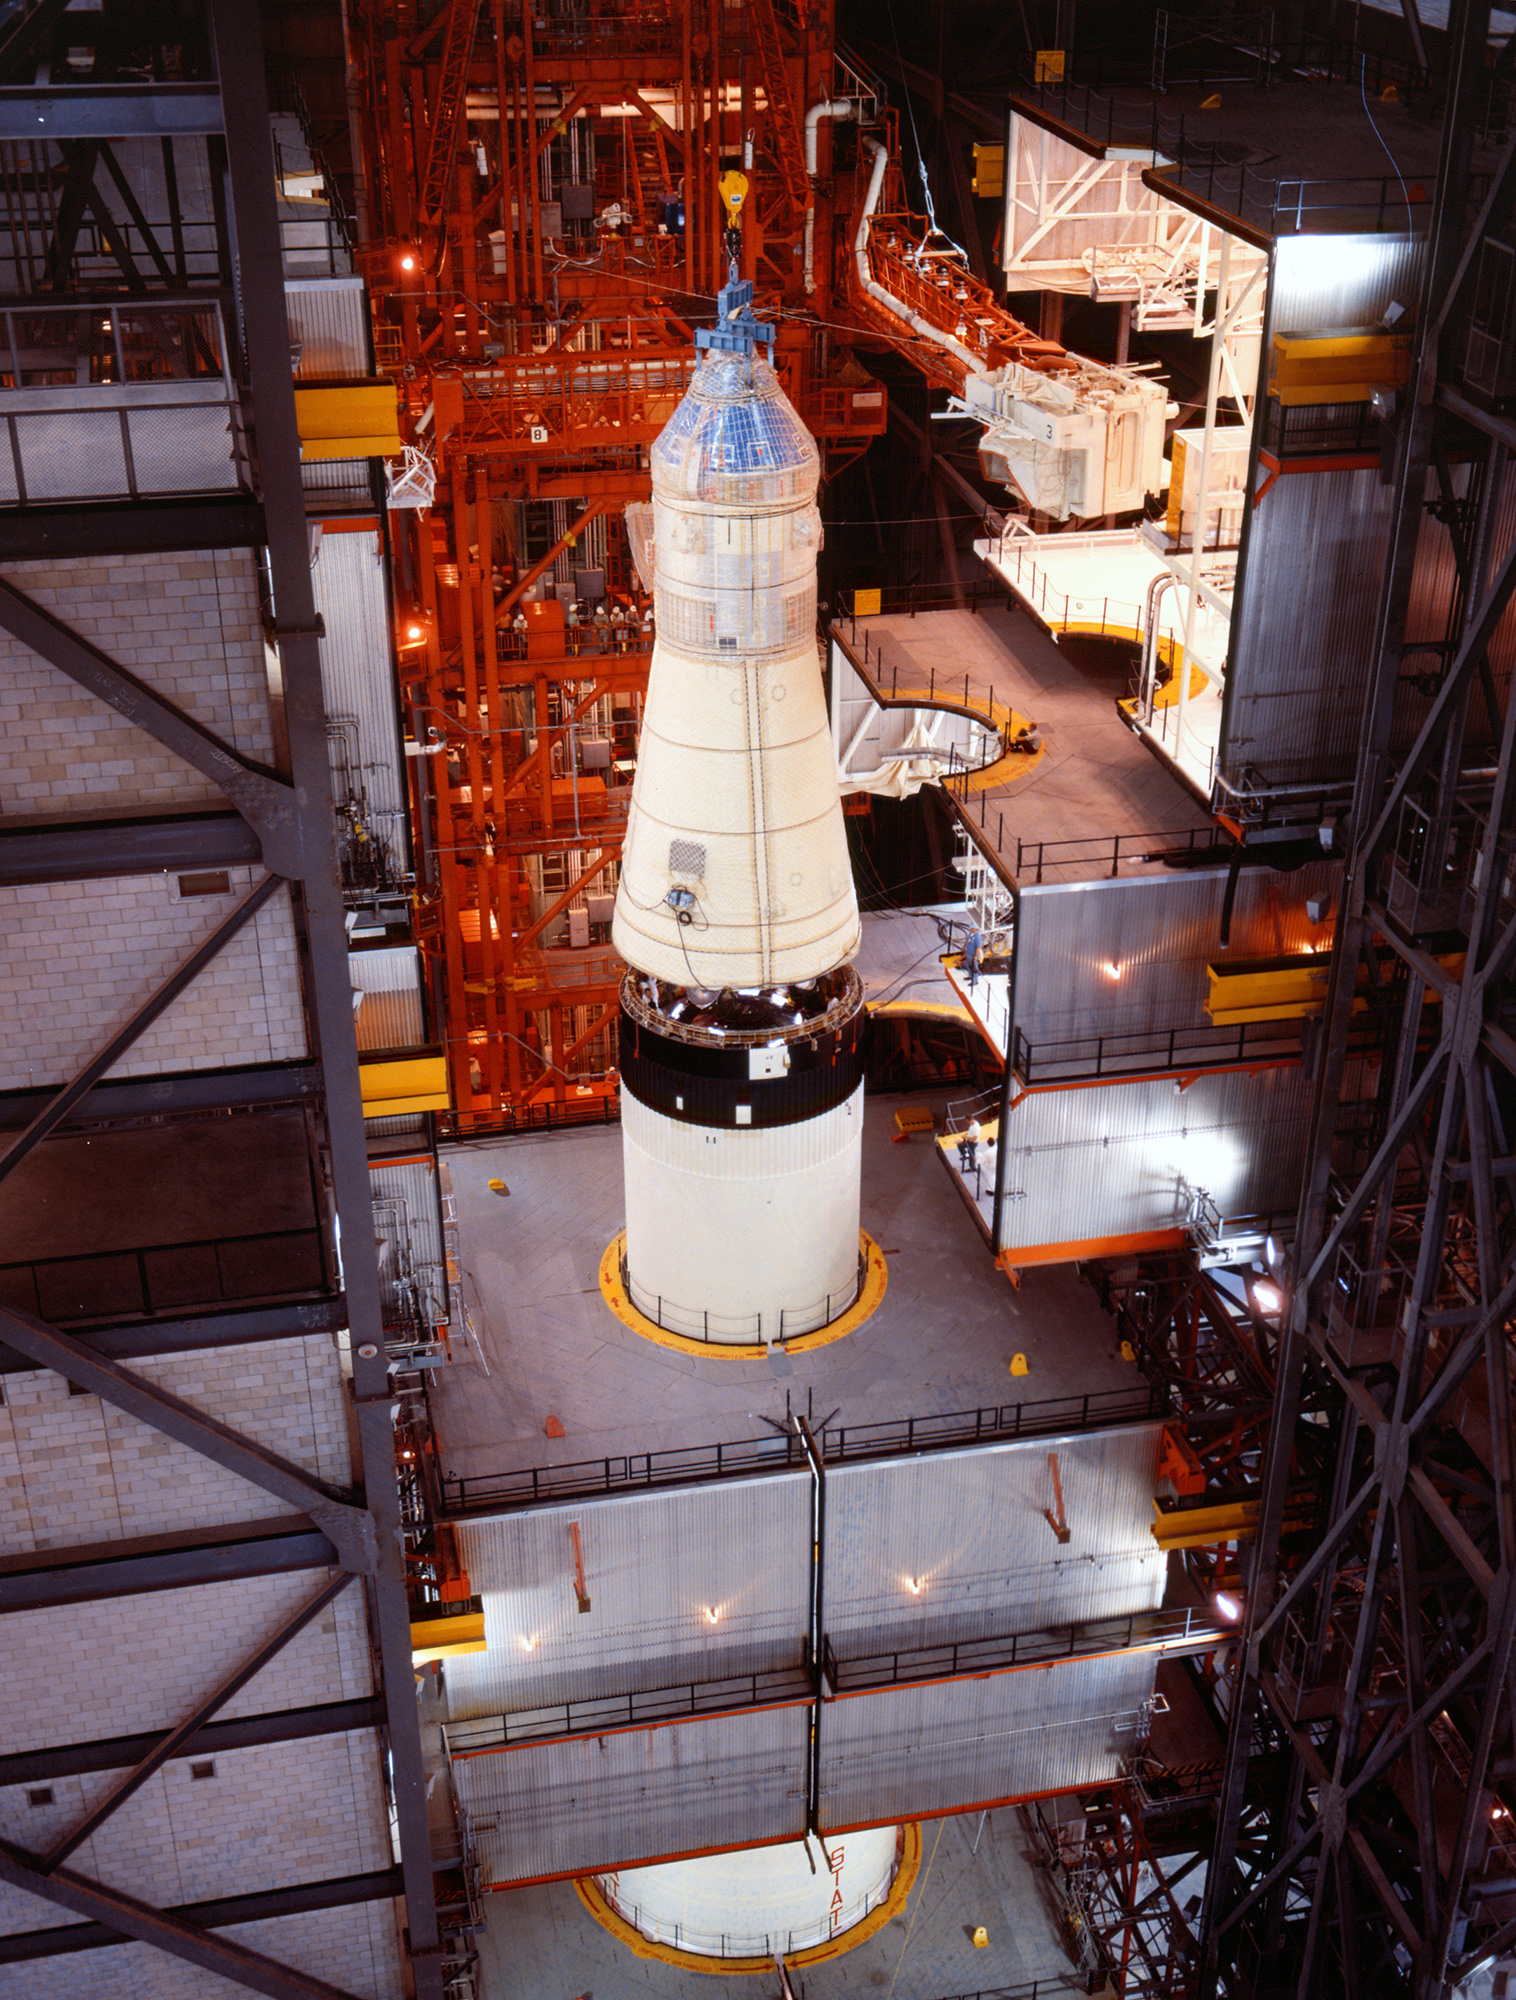 mating-of-the-apollo-11-spacecraft-to-the-saturn-v-launch-vehicle.jpg